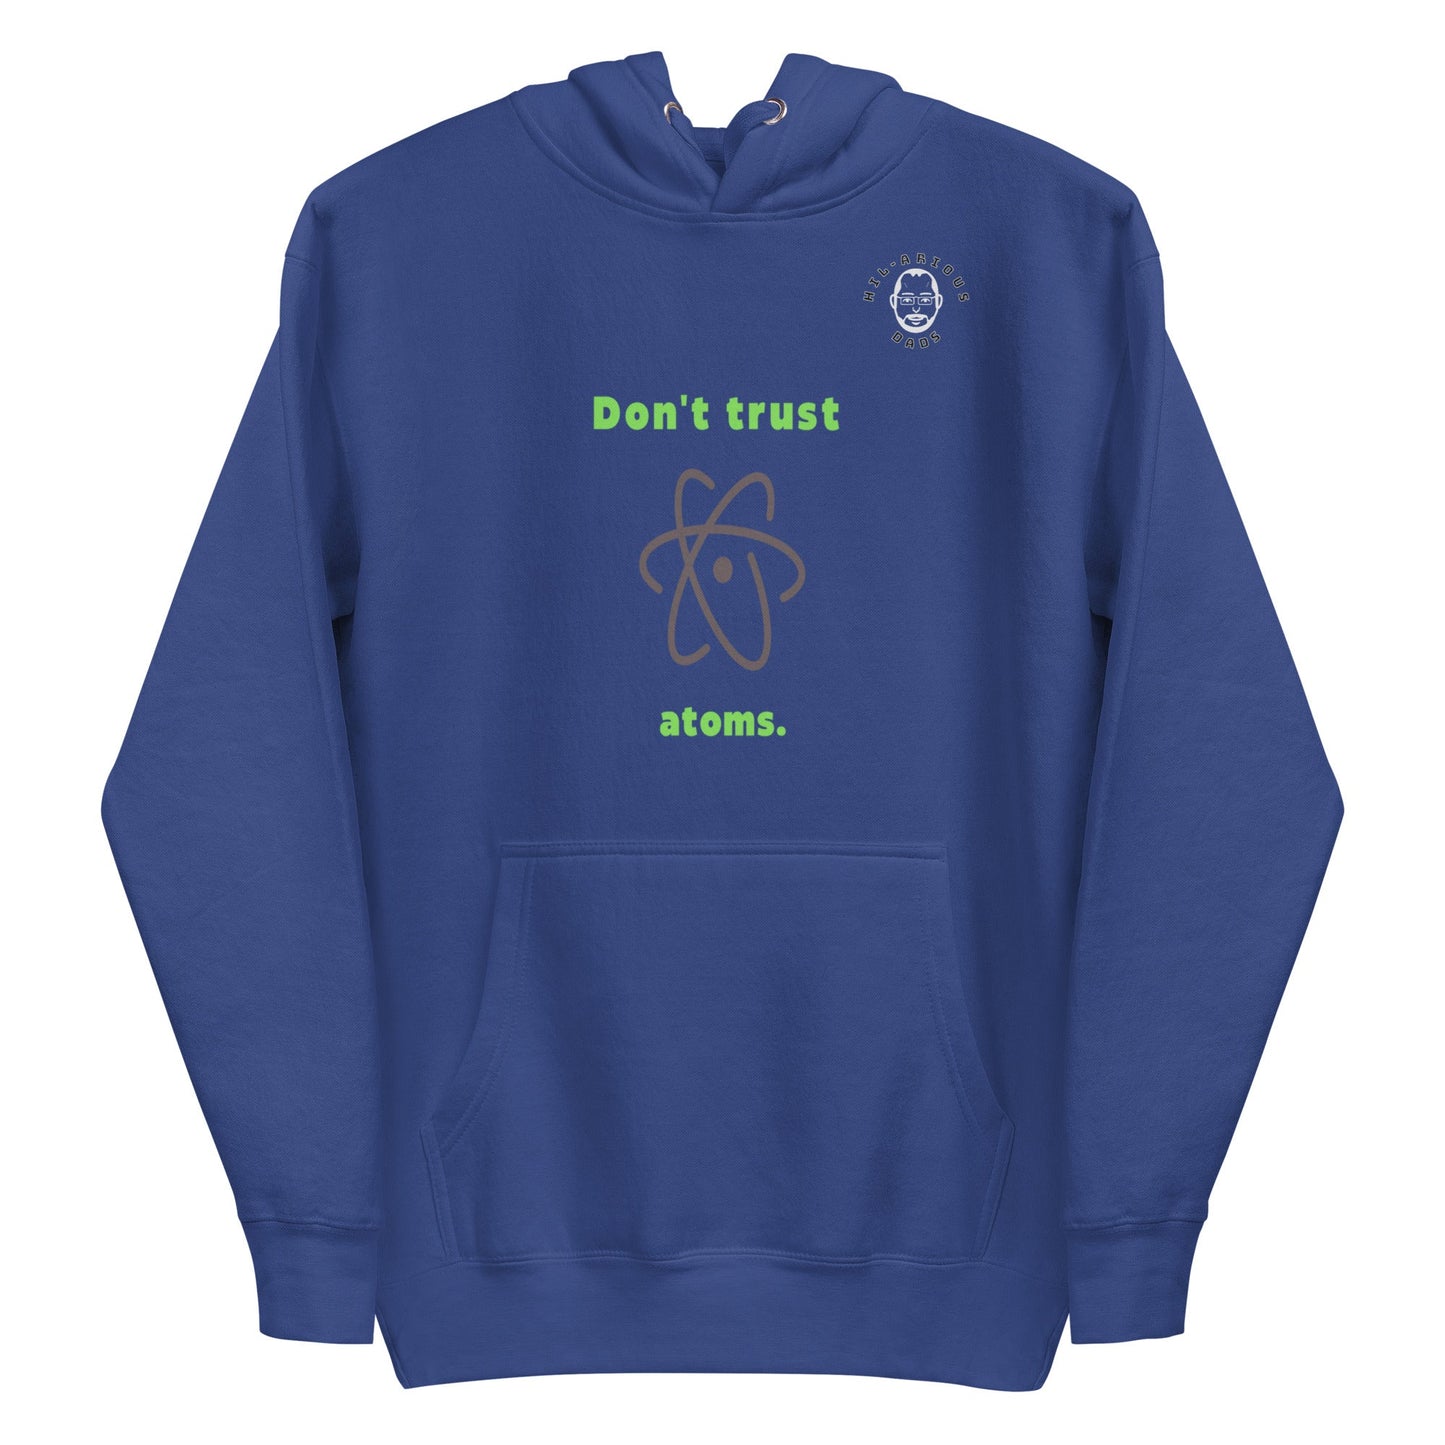 Don't trust atoms-Hoodie - Hil-arious Dads